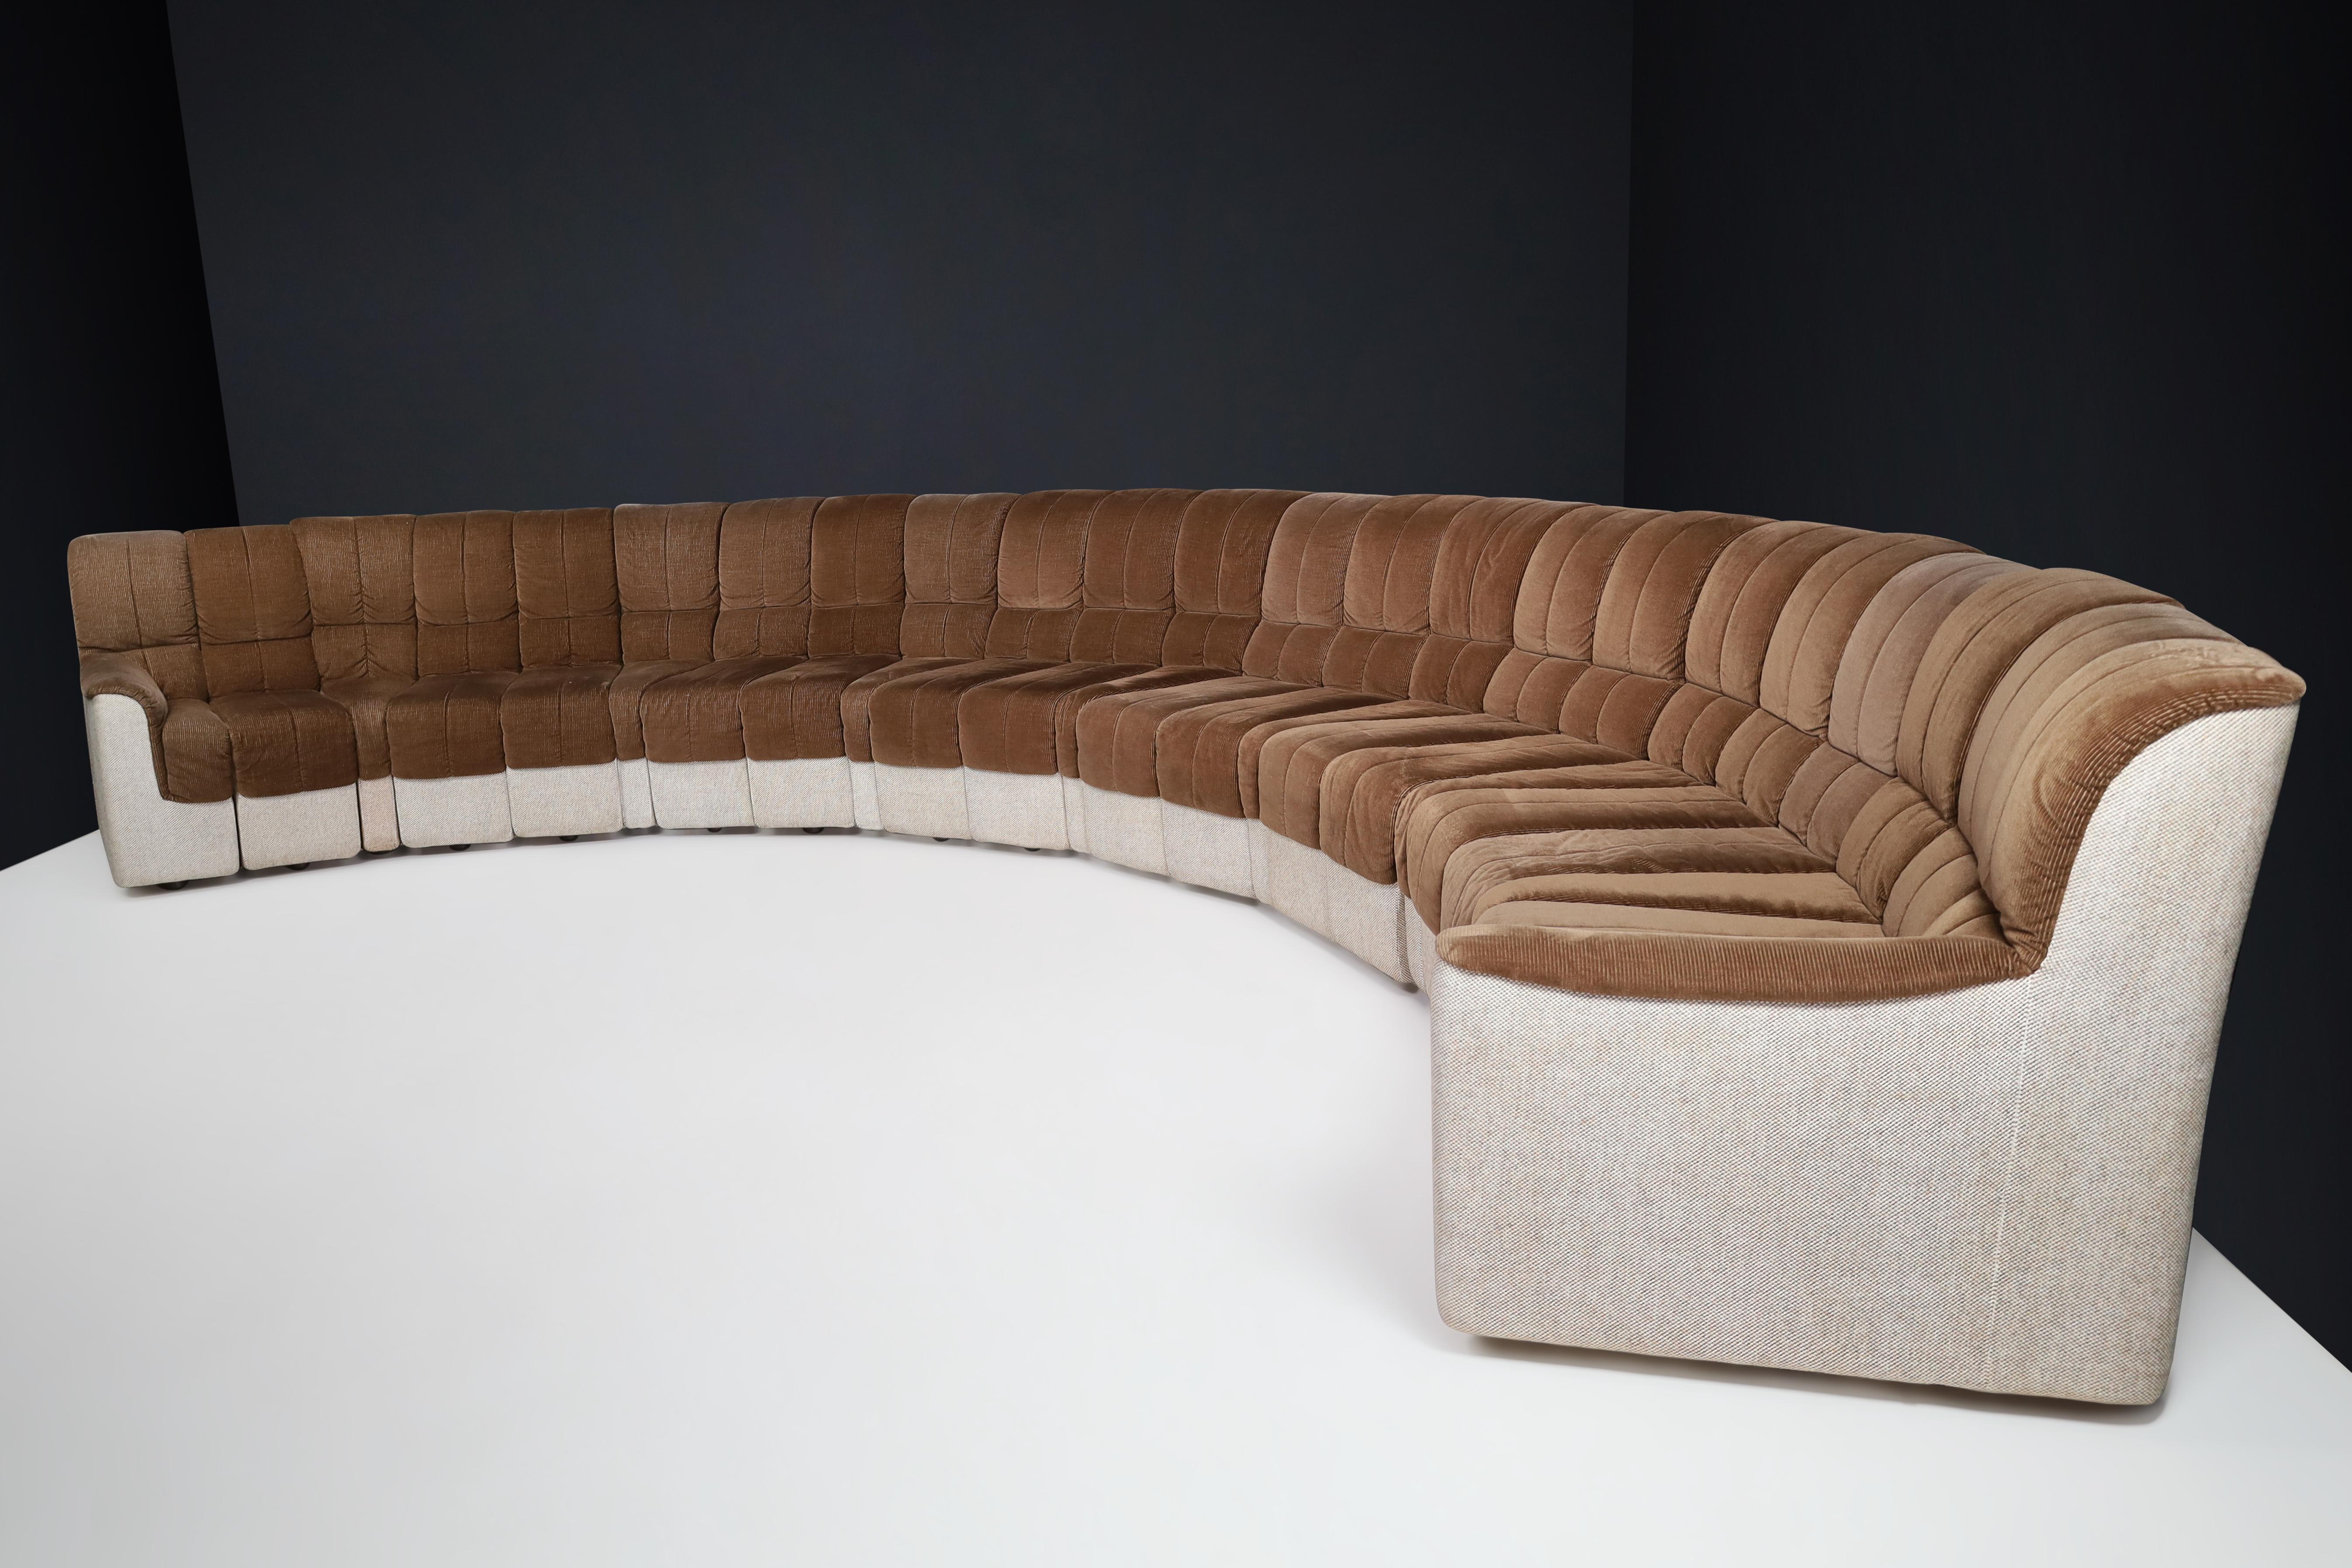 De Sede DS-600 Style Round Sofa in Corduroy Fabric, Germany, 1970s For Sale 5